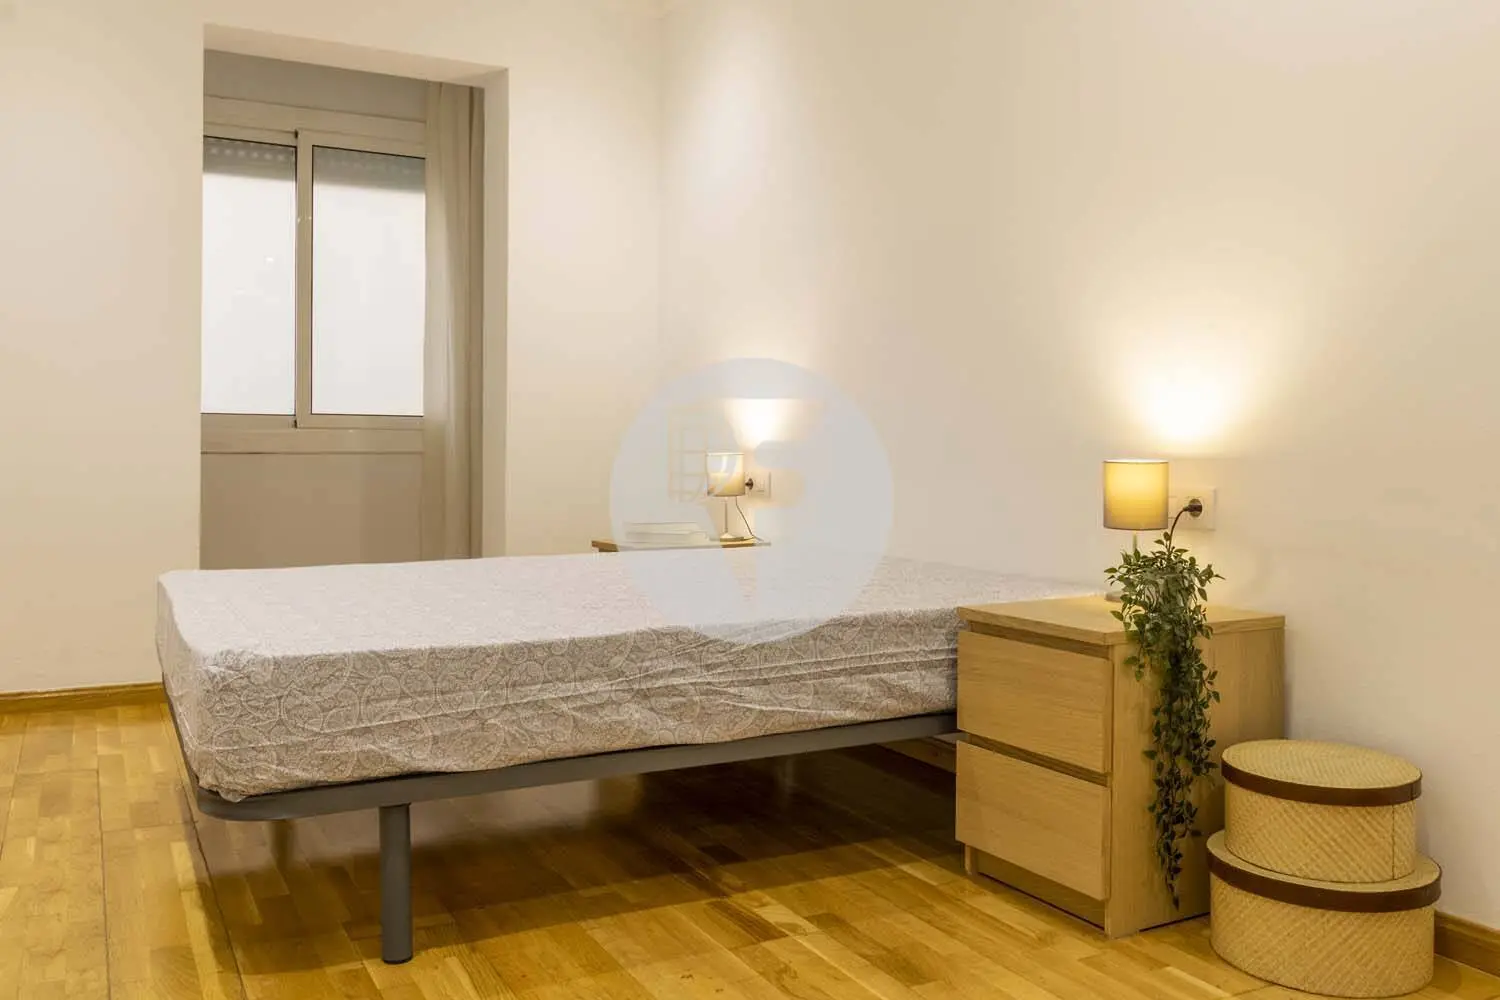 Furnished and equipped on Rosselló Street 26